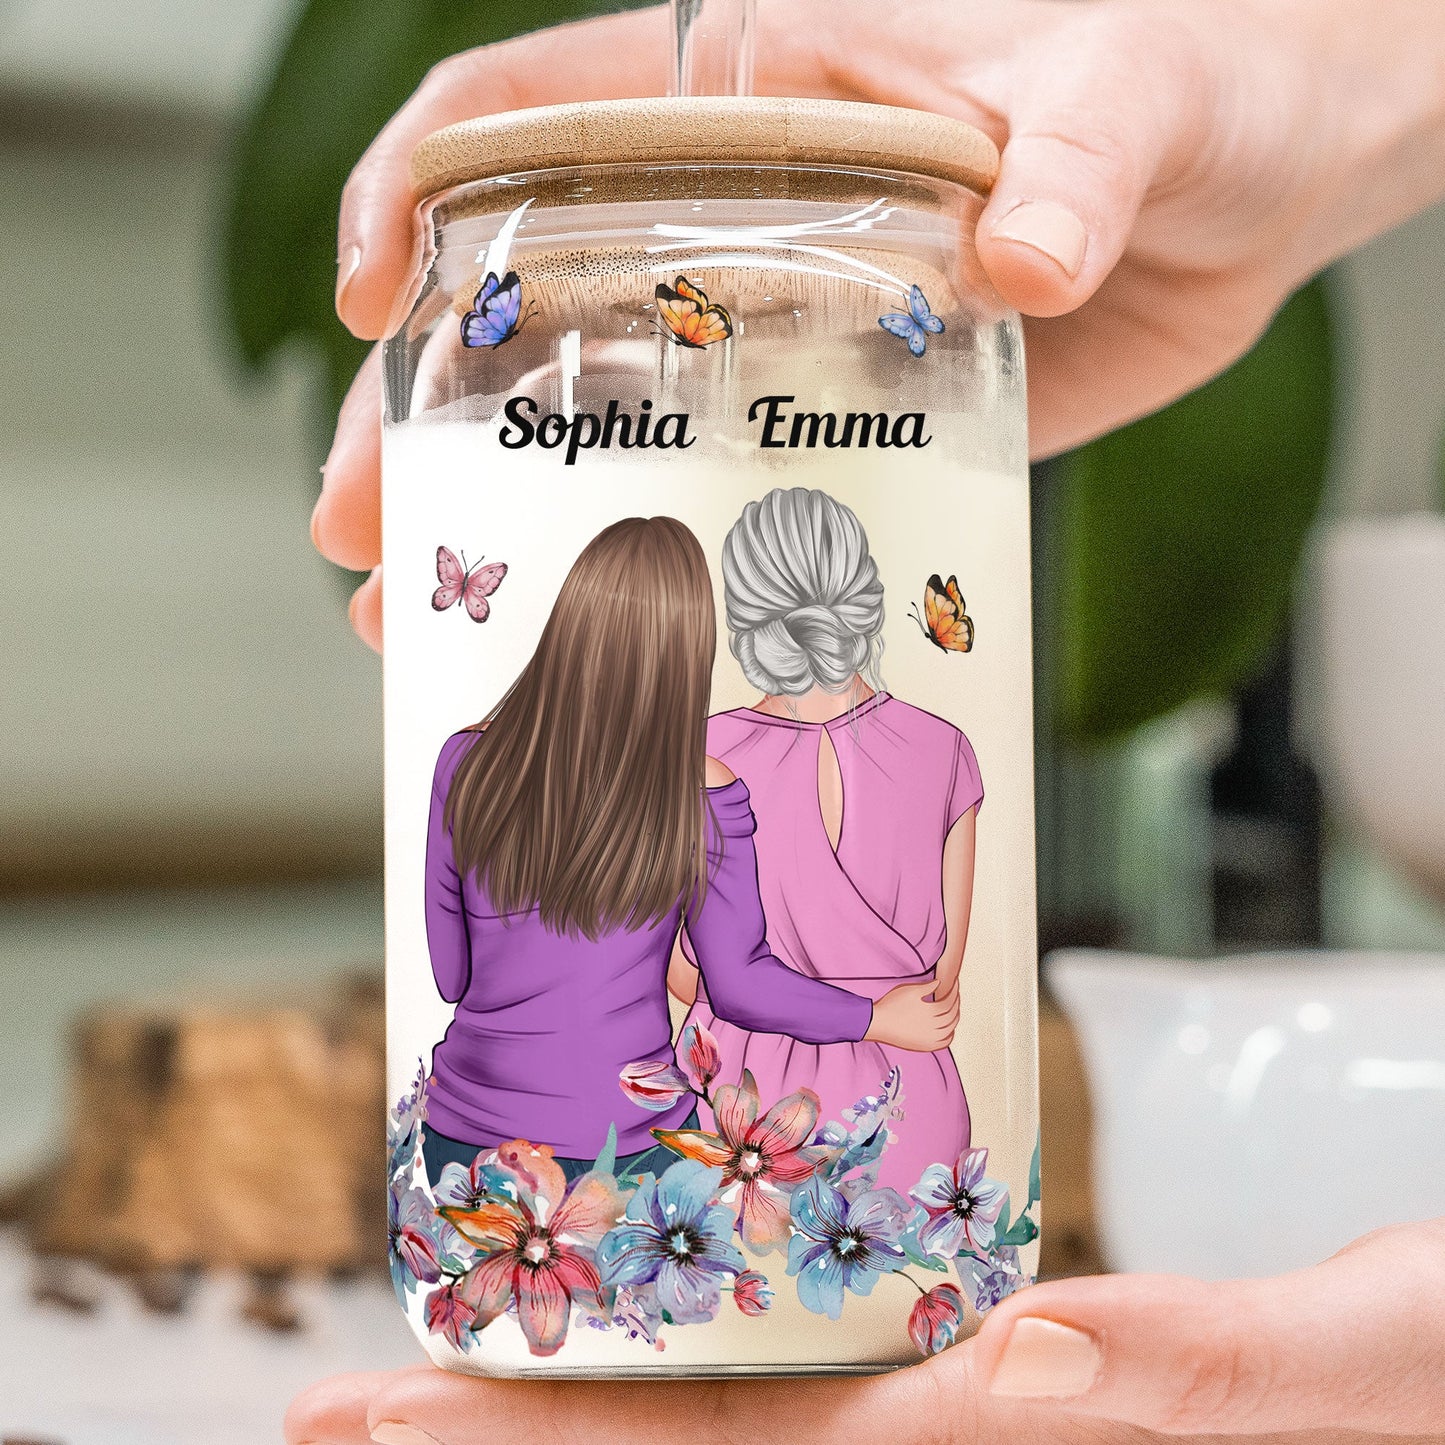 Always Remember You Are Braver - Personalized Clear Glass Can